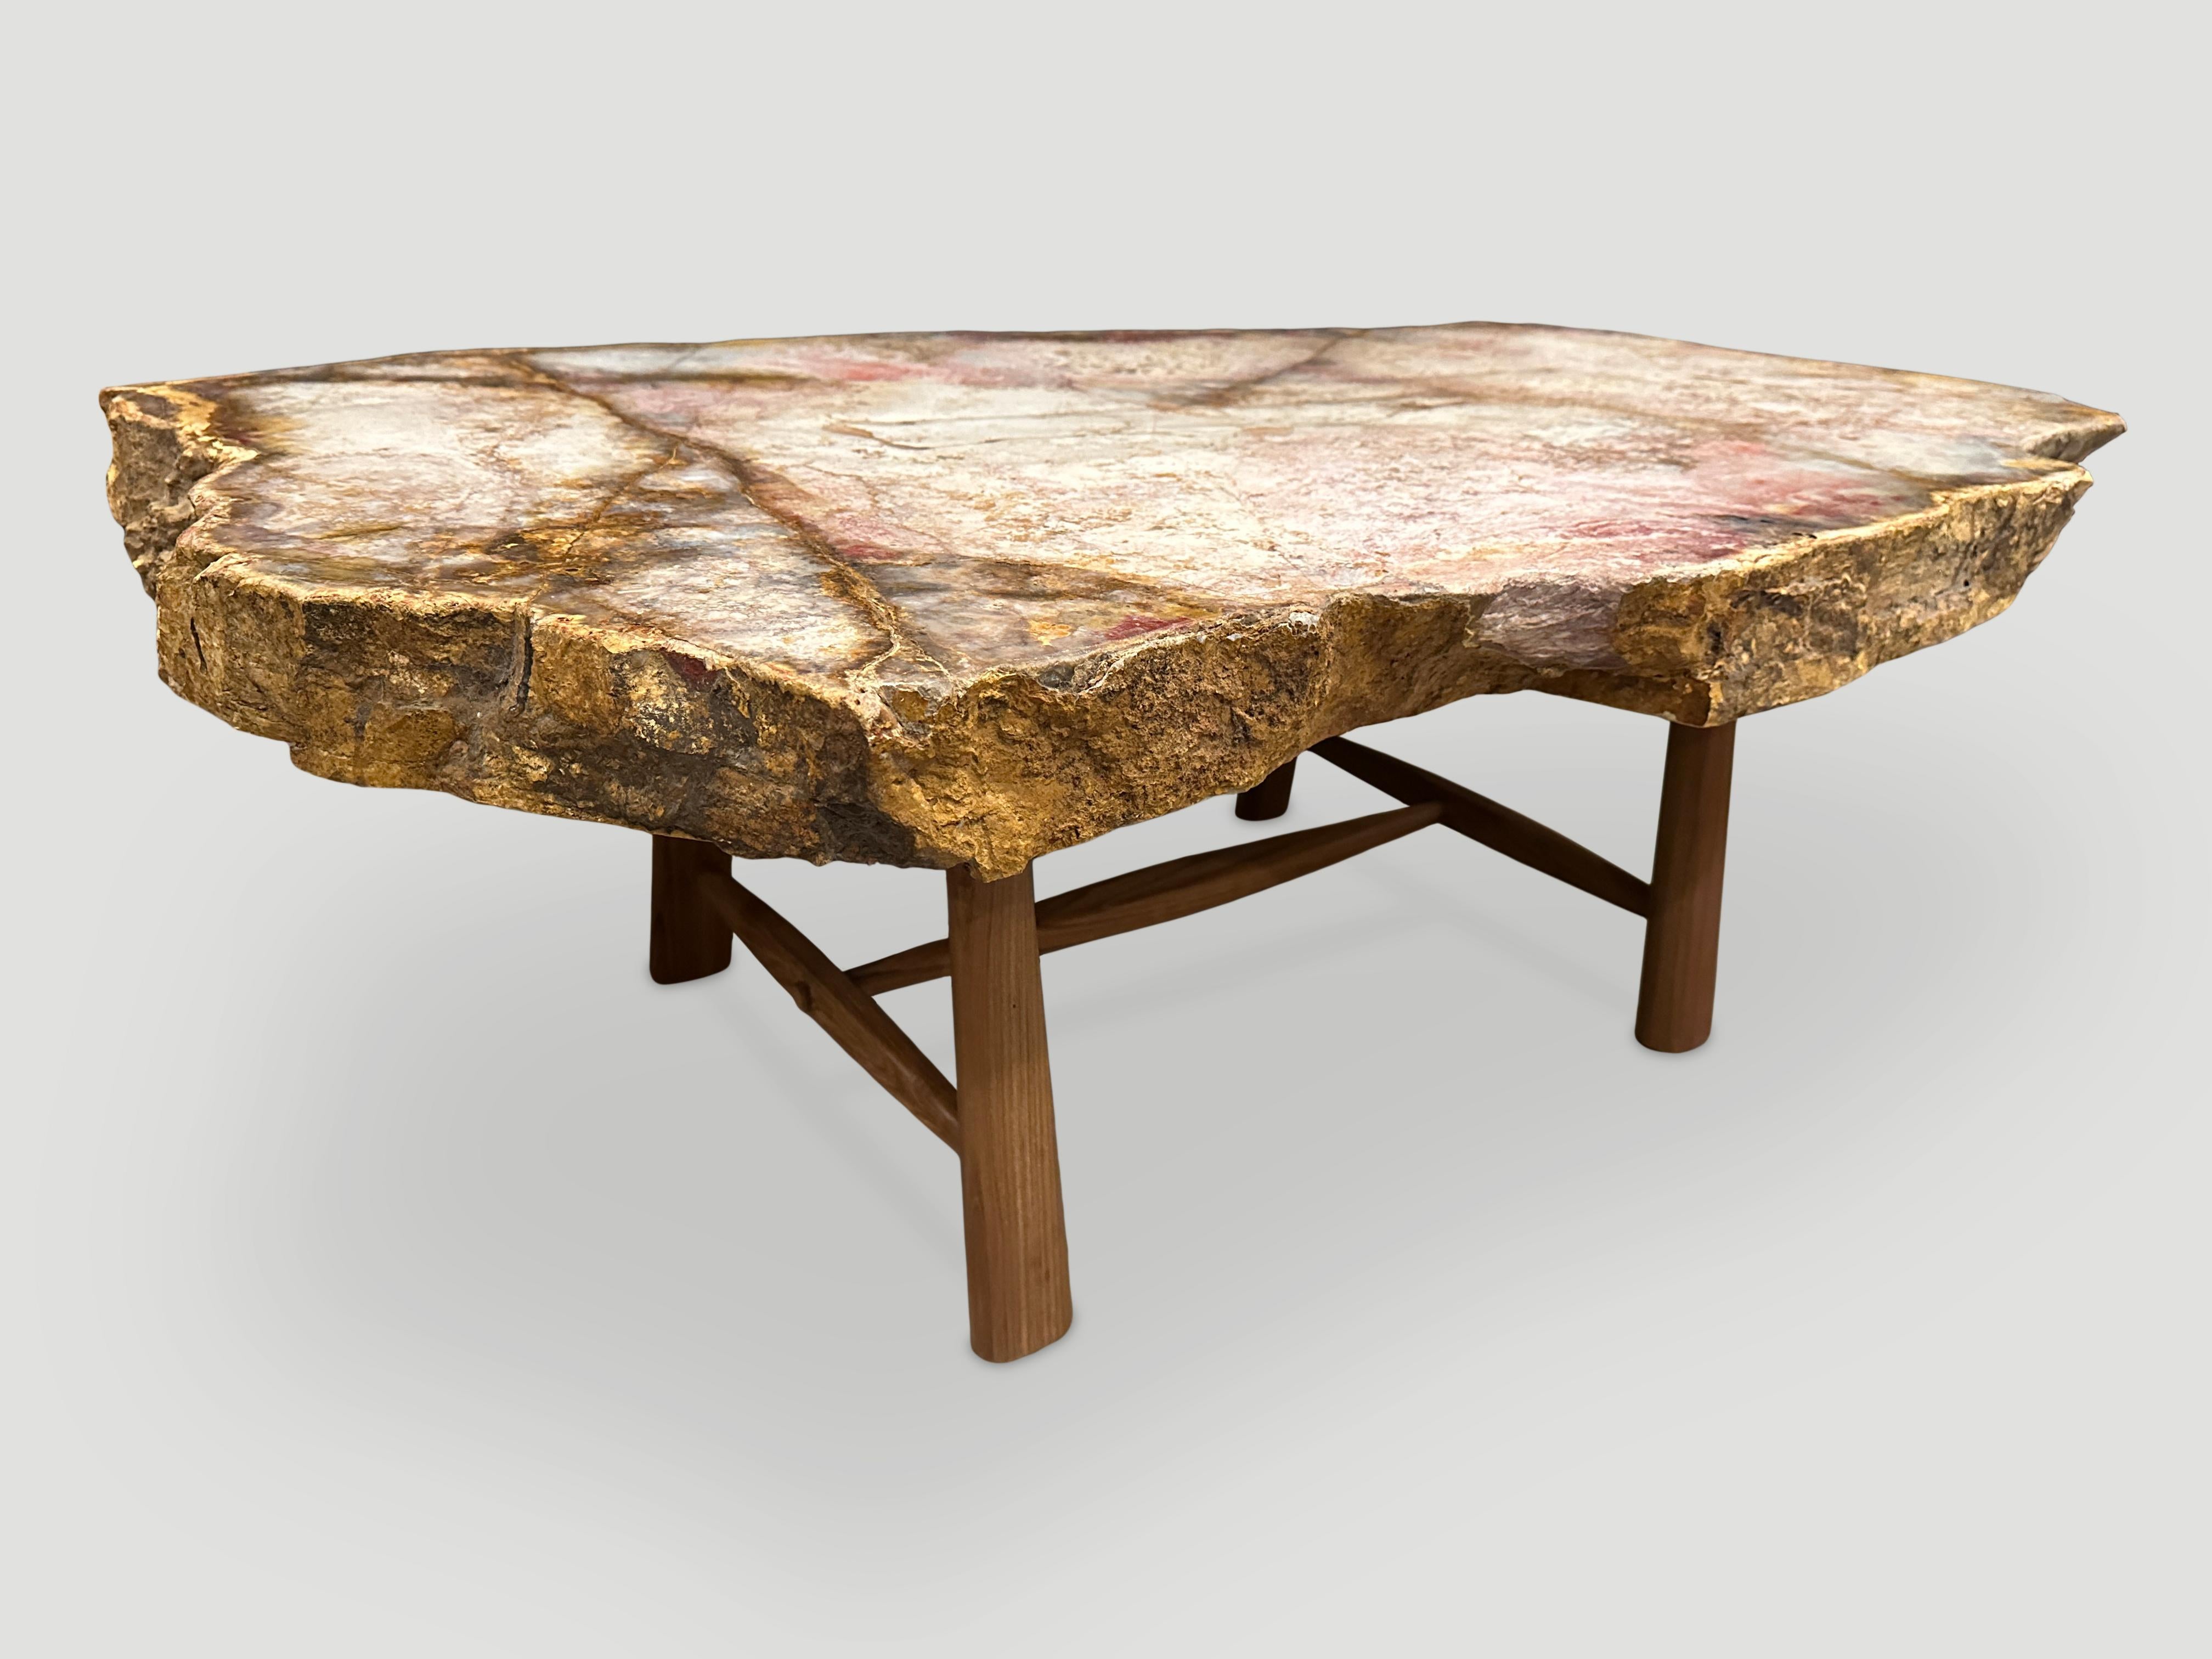 Andrianna Shamaris Beautiful Rare Petrified Wood Coffee Table In Excellent Condition For Sale In New York, NY